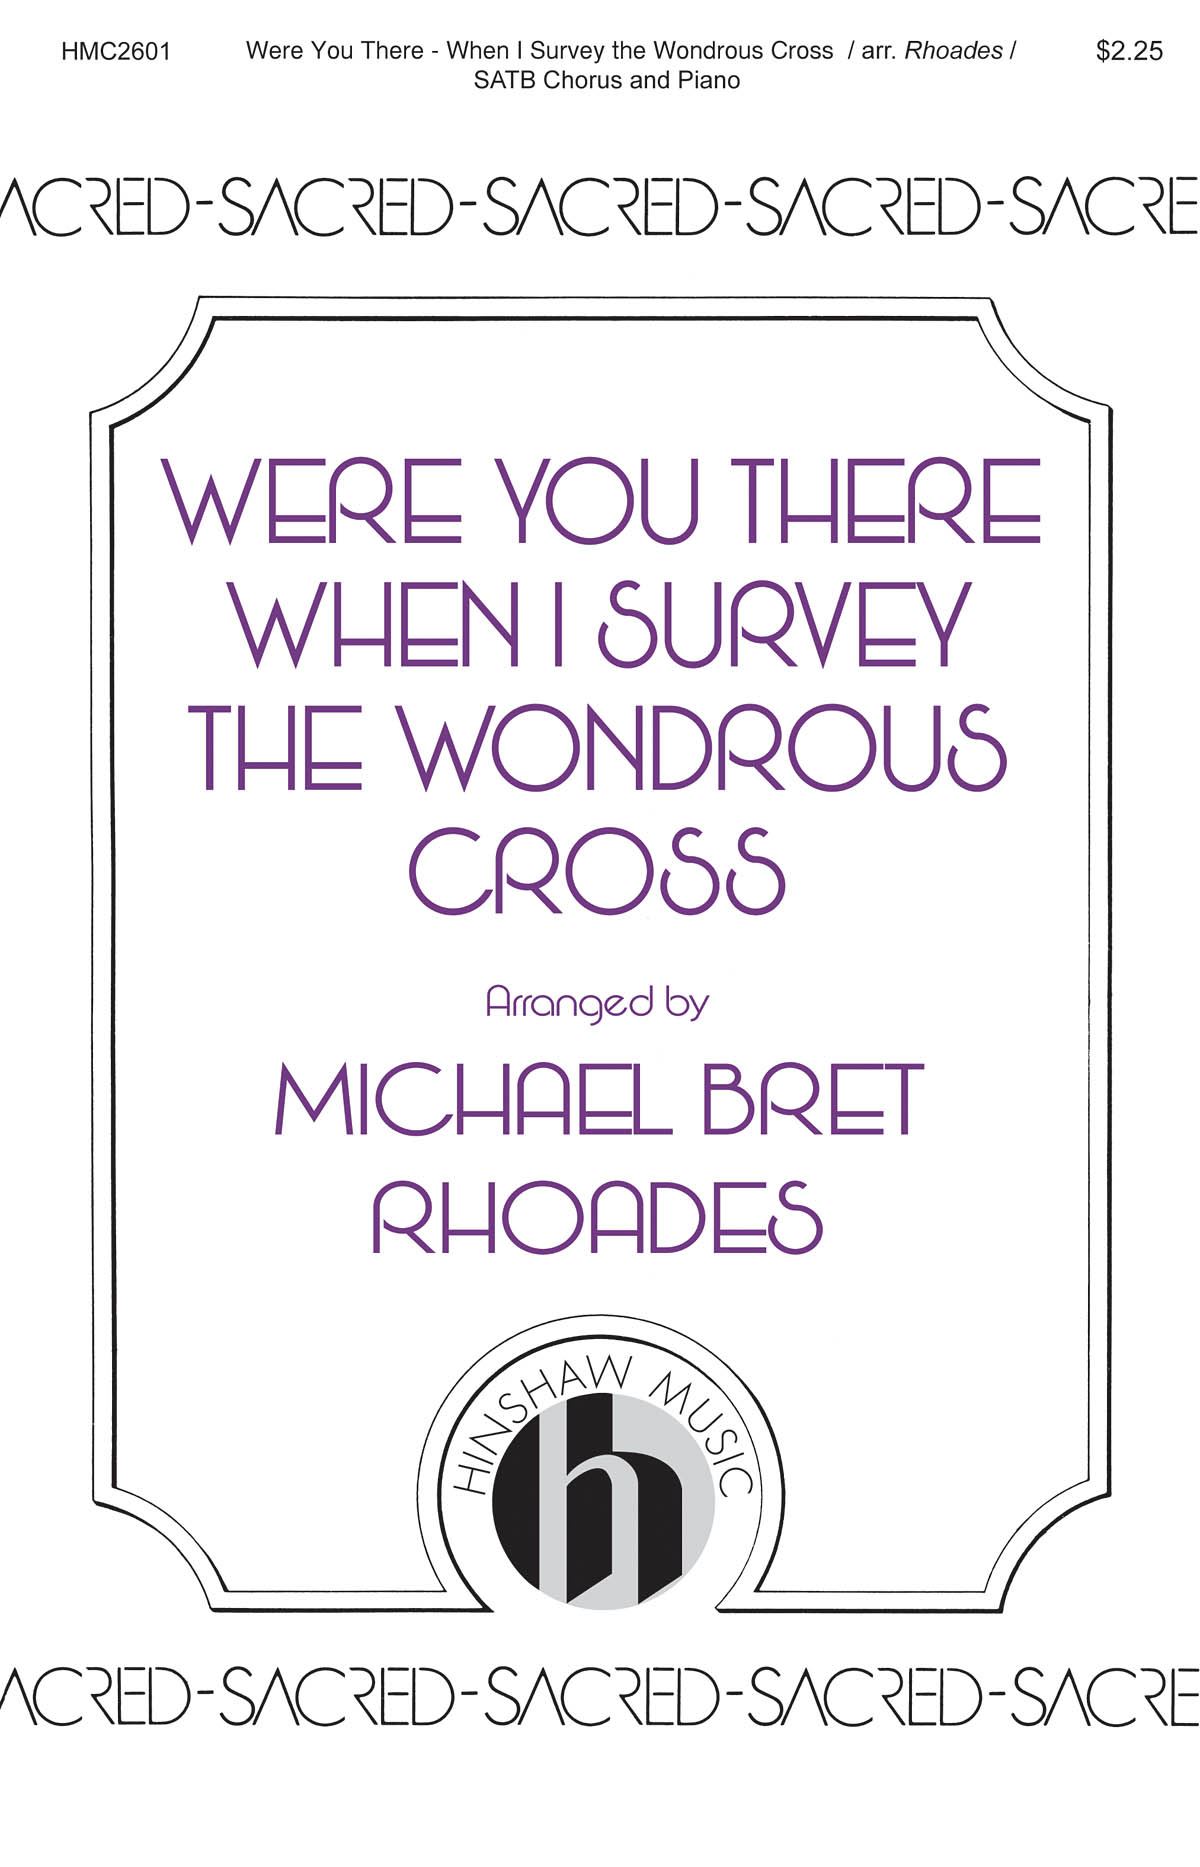 Were You There - When I Survey: Mixed Choir a Cappella: Vocal Score